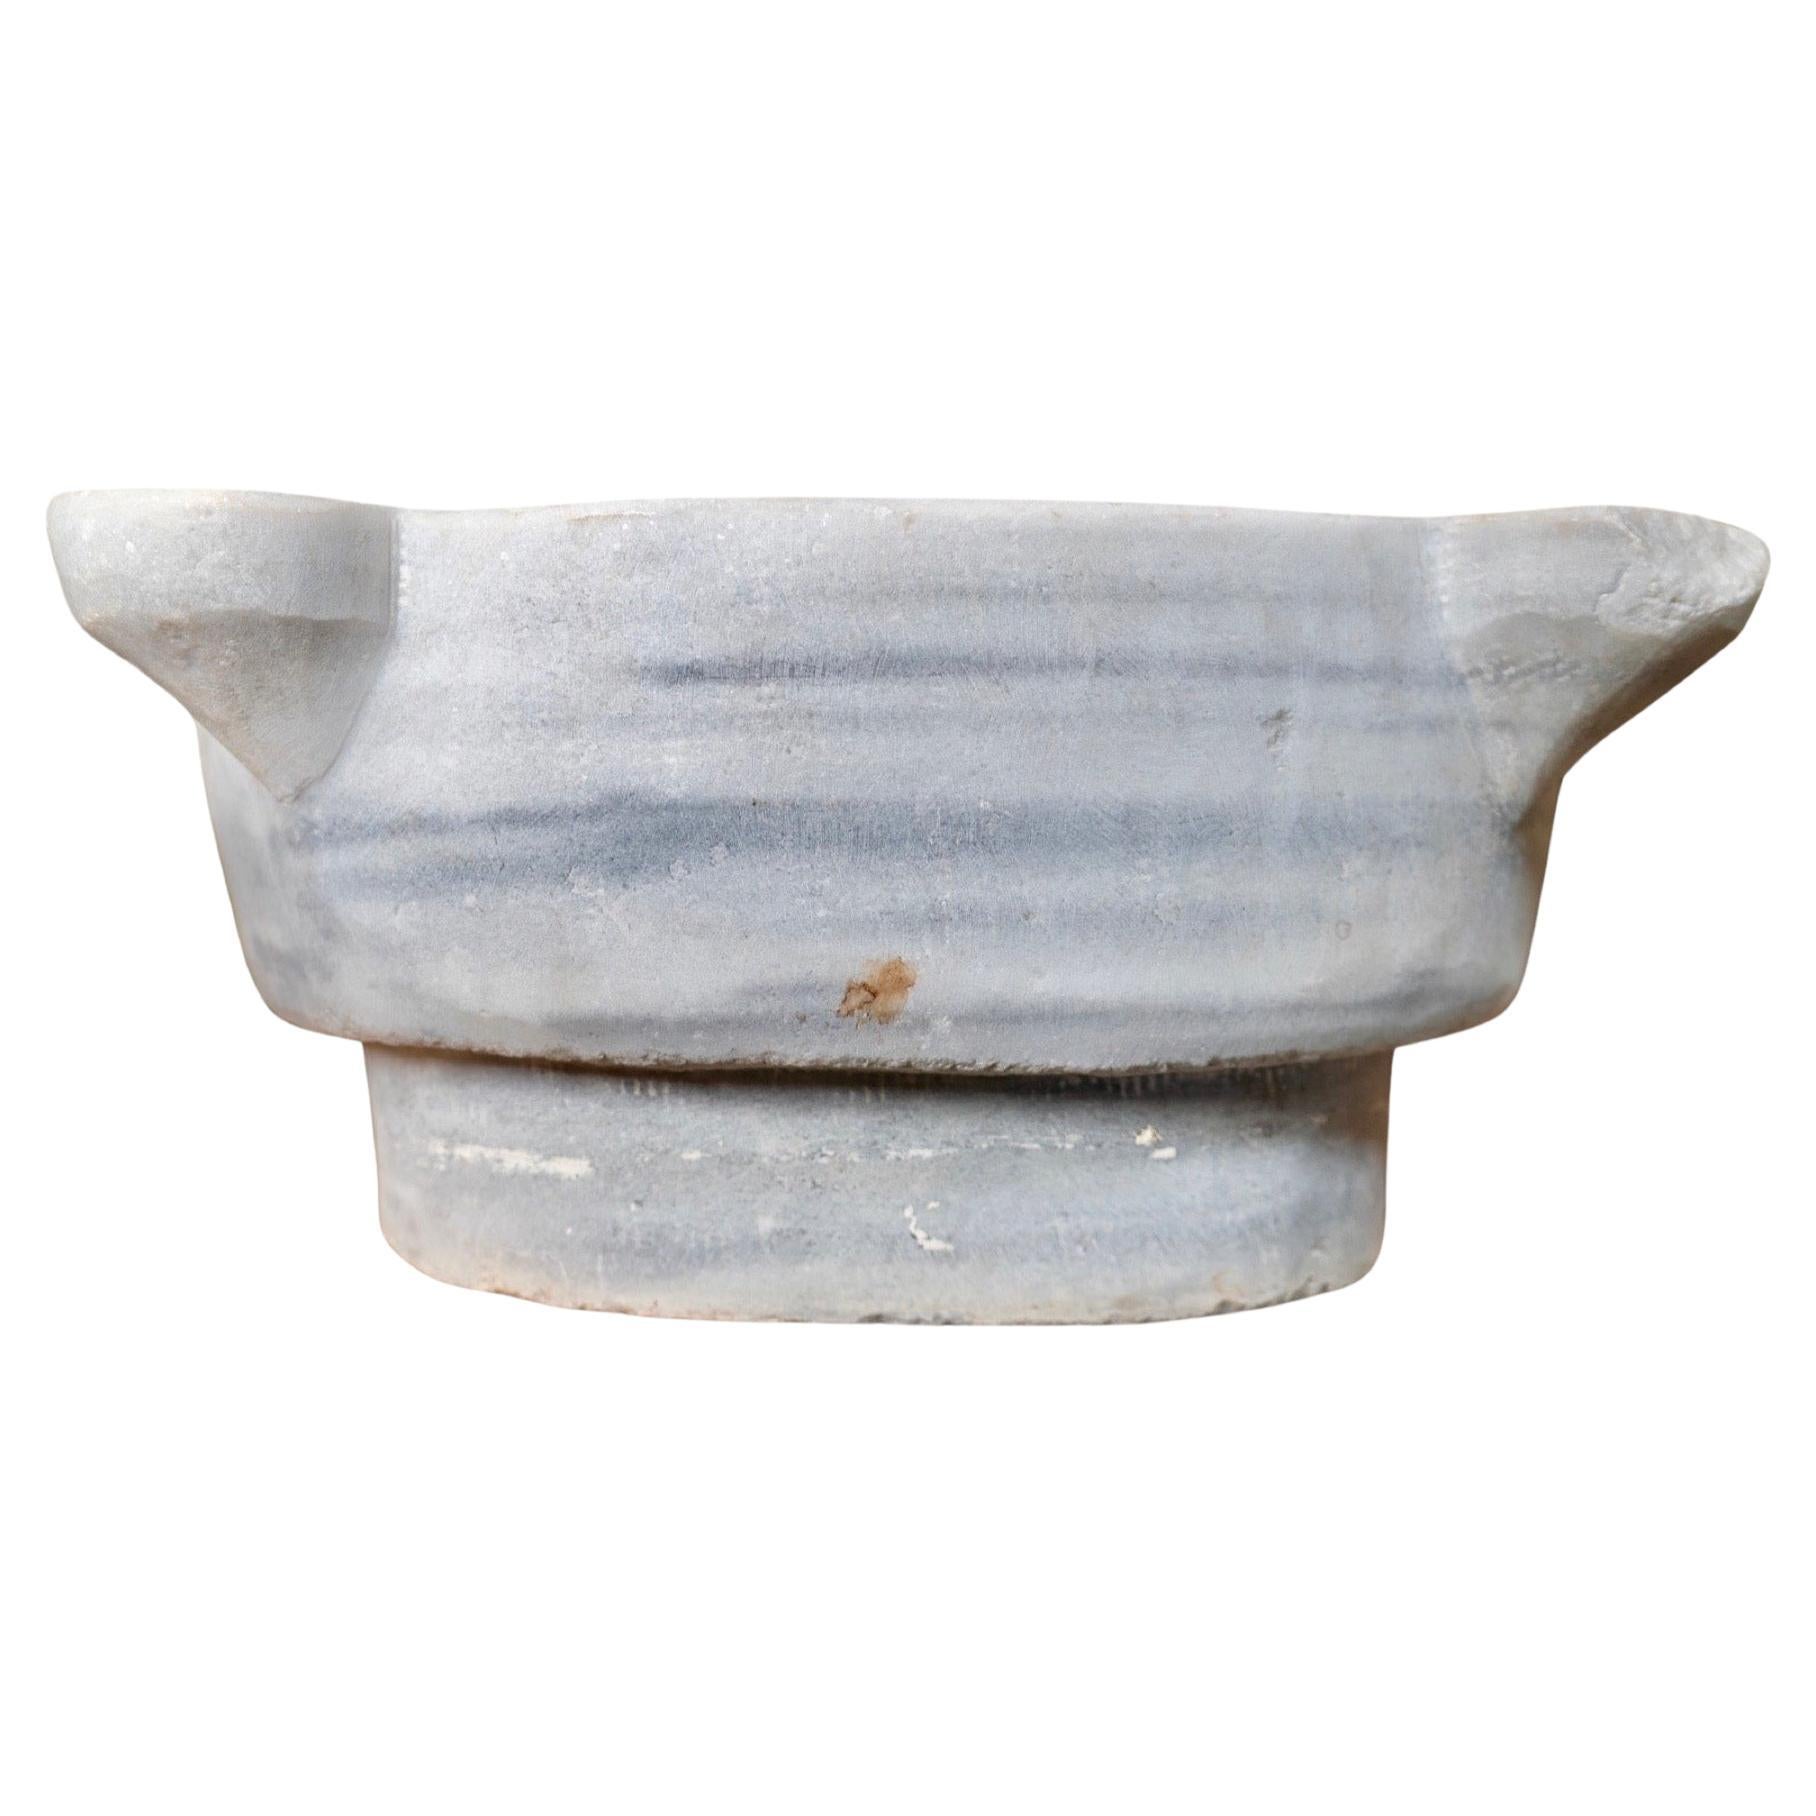 Mid-19th Century Greek White Marble Sink For Sale